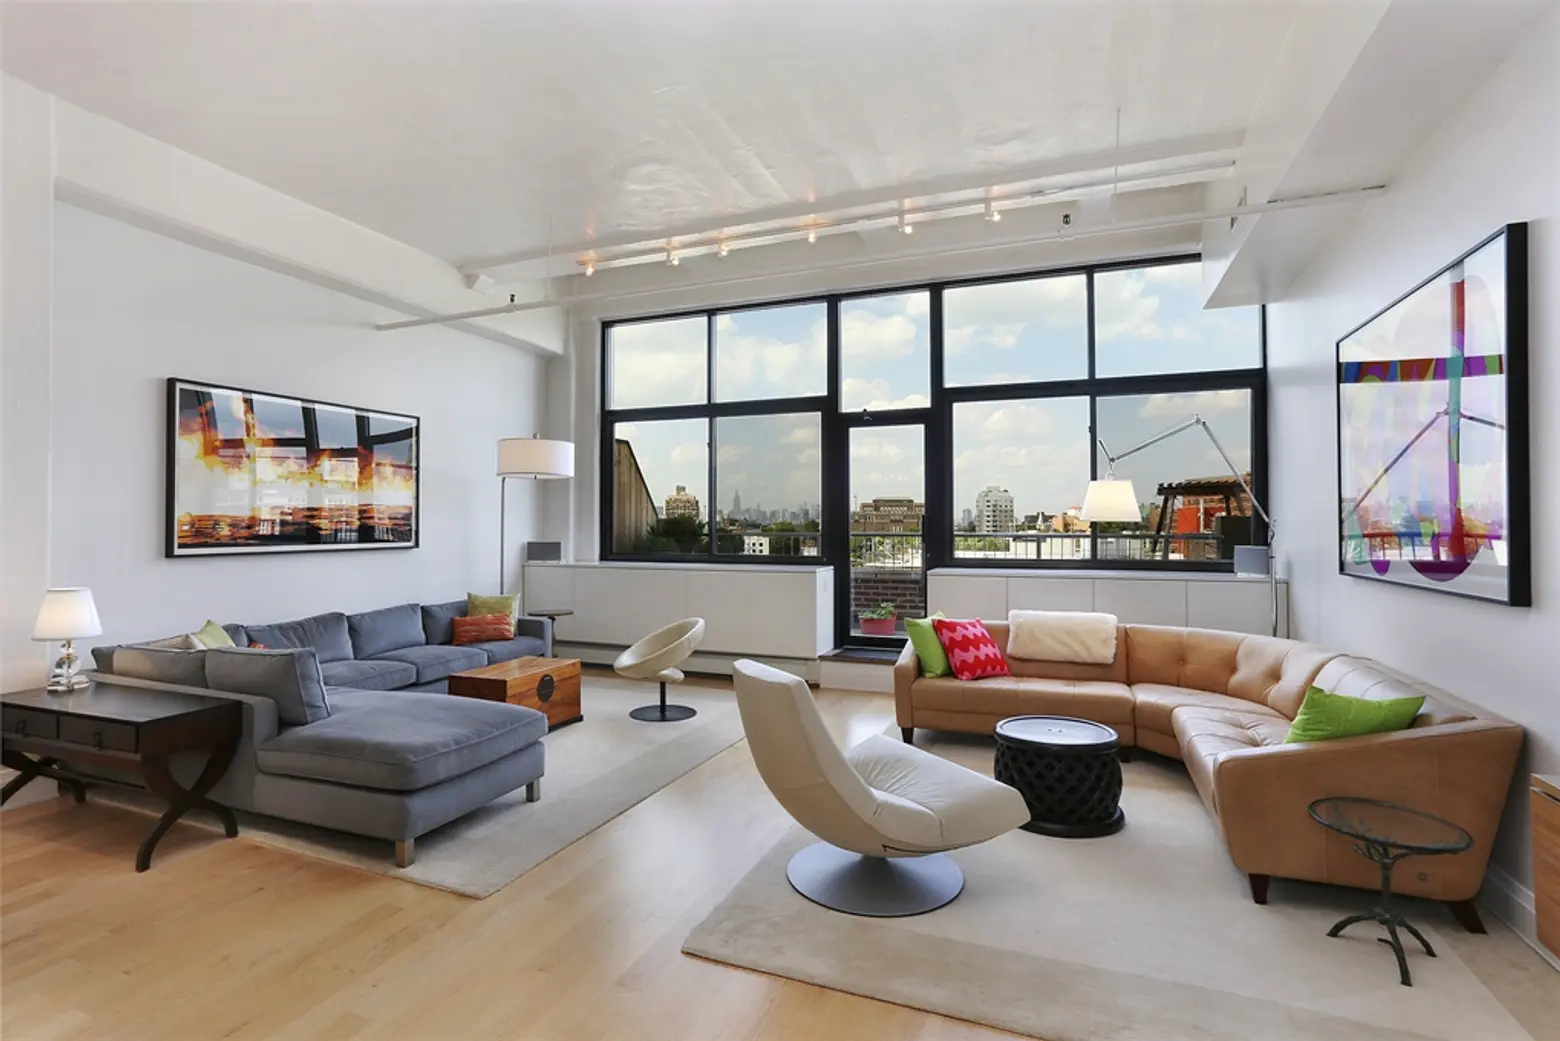 Extra! Extra! Read All About.…This Exquisite Newswalk Condo in Prospect Heights